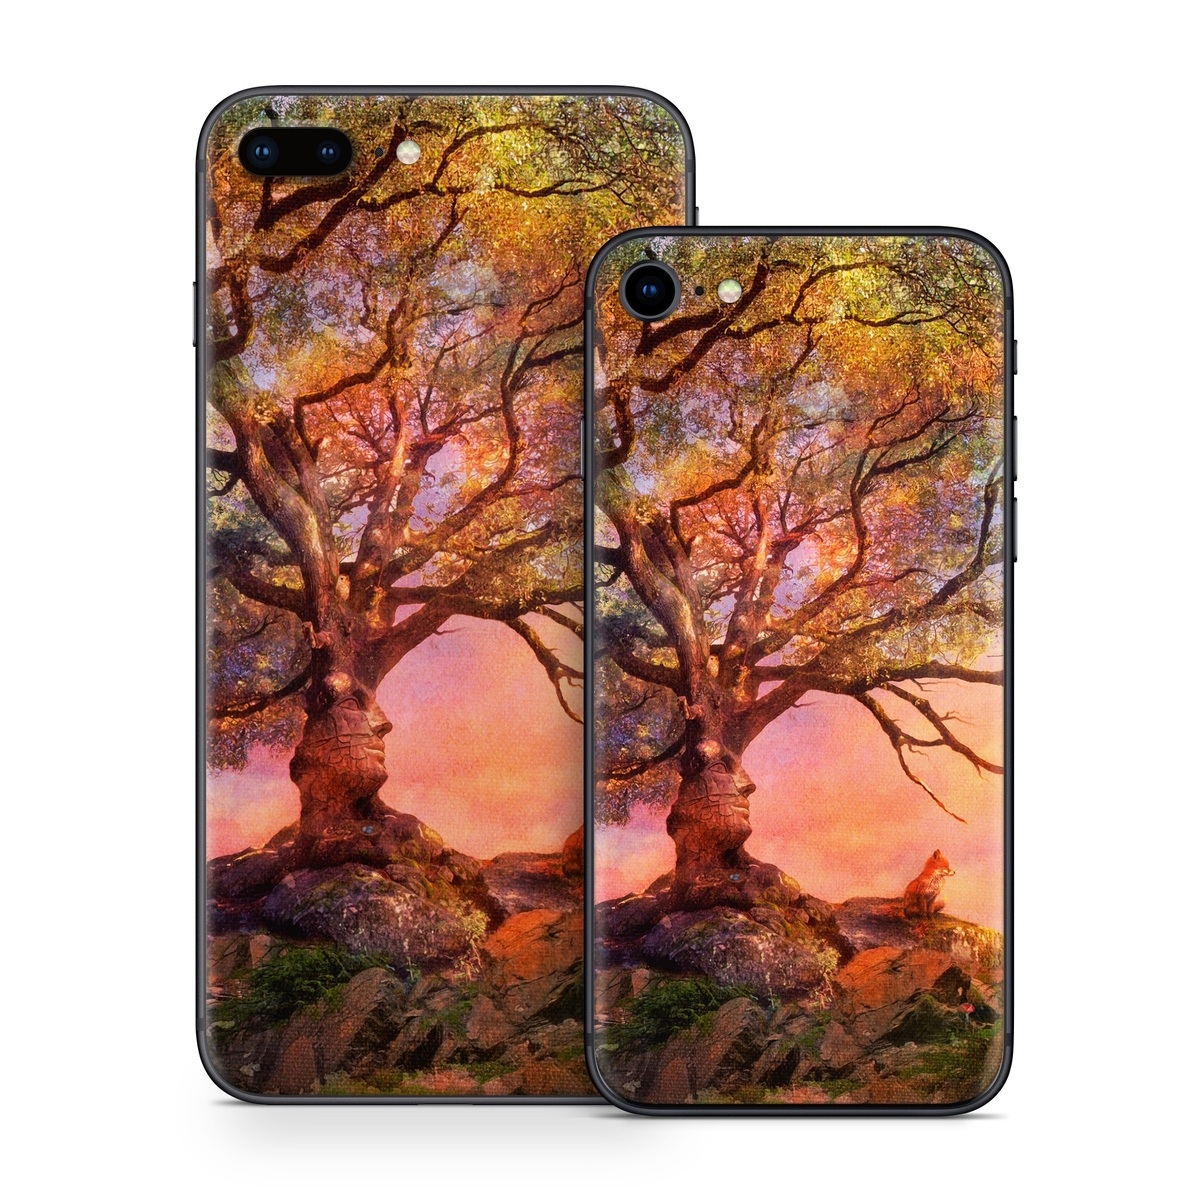 iPhone 8 Series Skin design of Nature, Tree, Sky, Natural landscape, Branch, Leaf, Woody plant, Trunk, Landscape, Plant, with pink, red, black, green, gray, orange colors